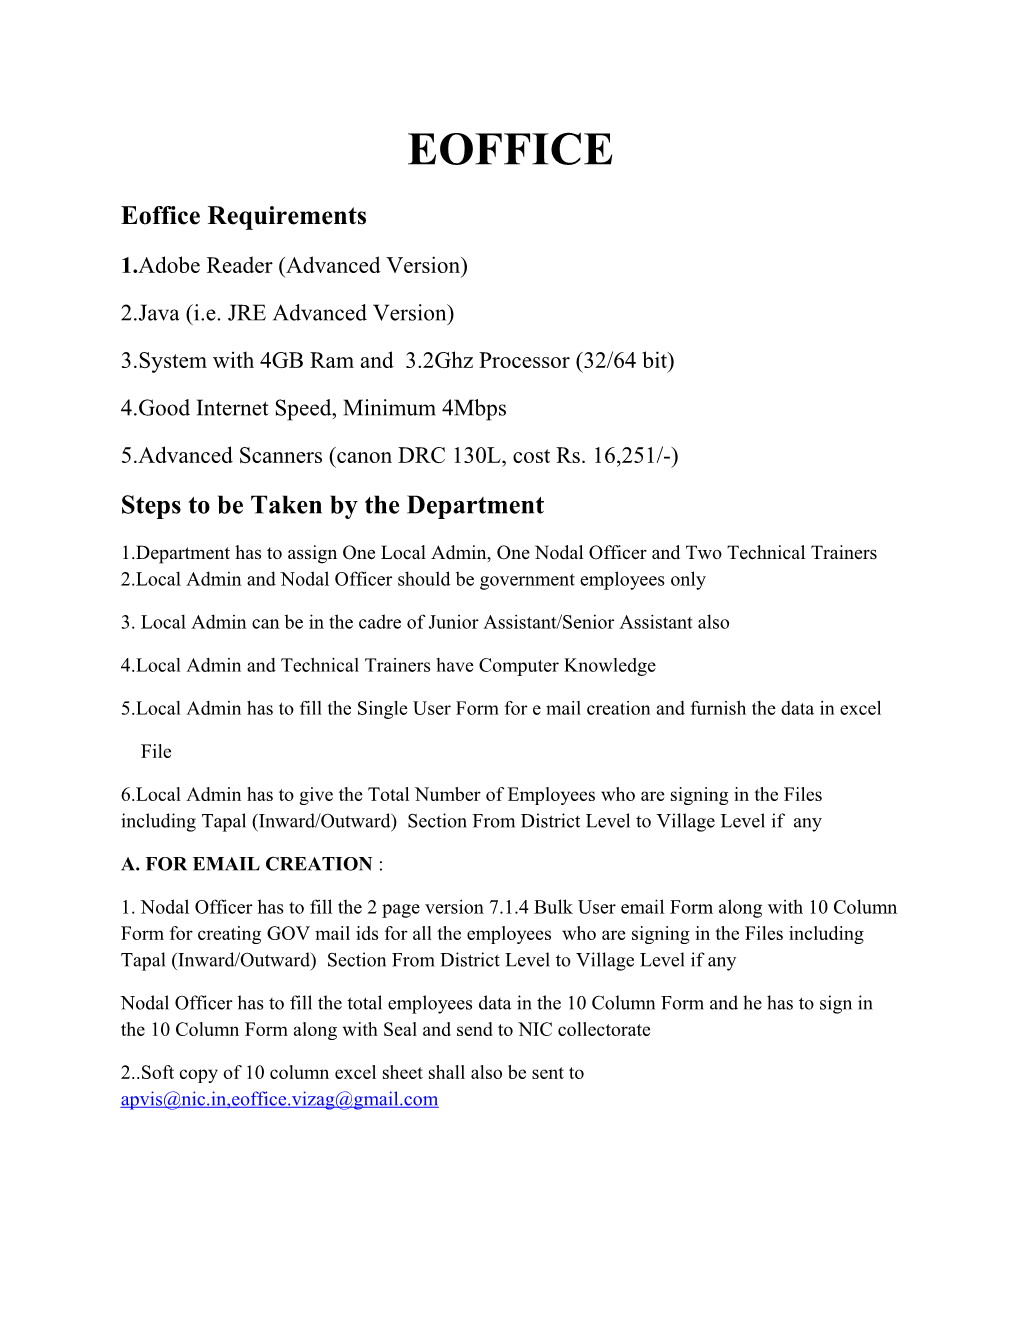 Eoffice Requirements